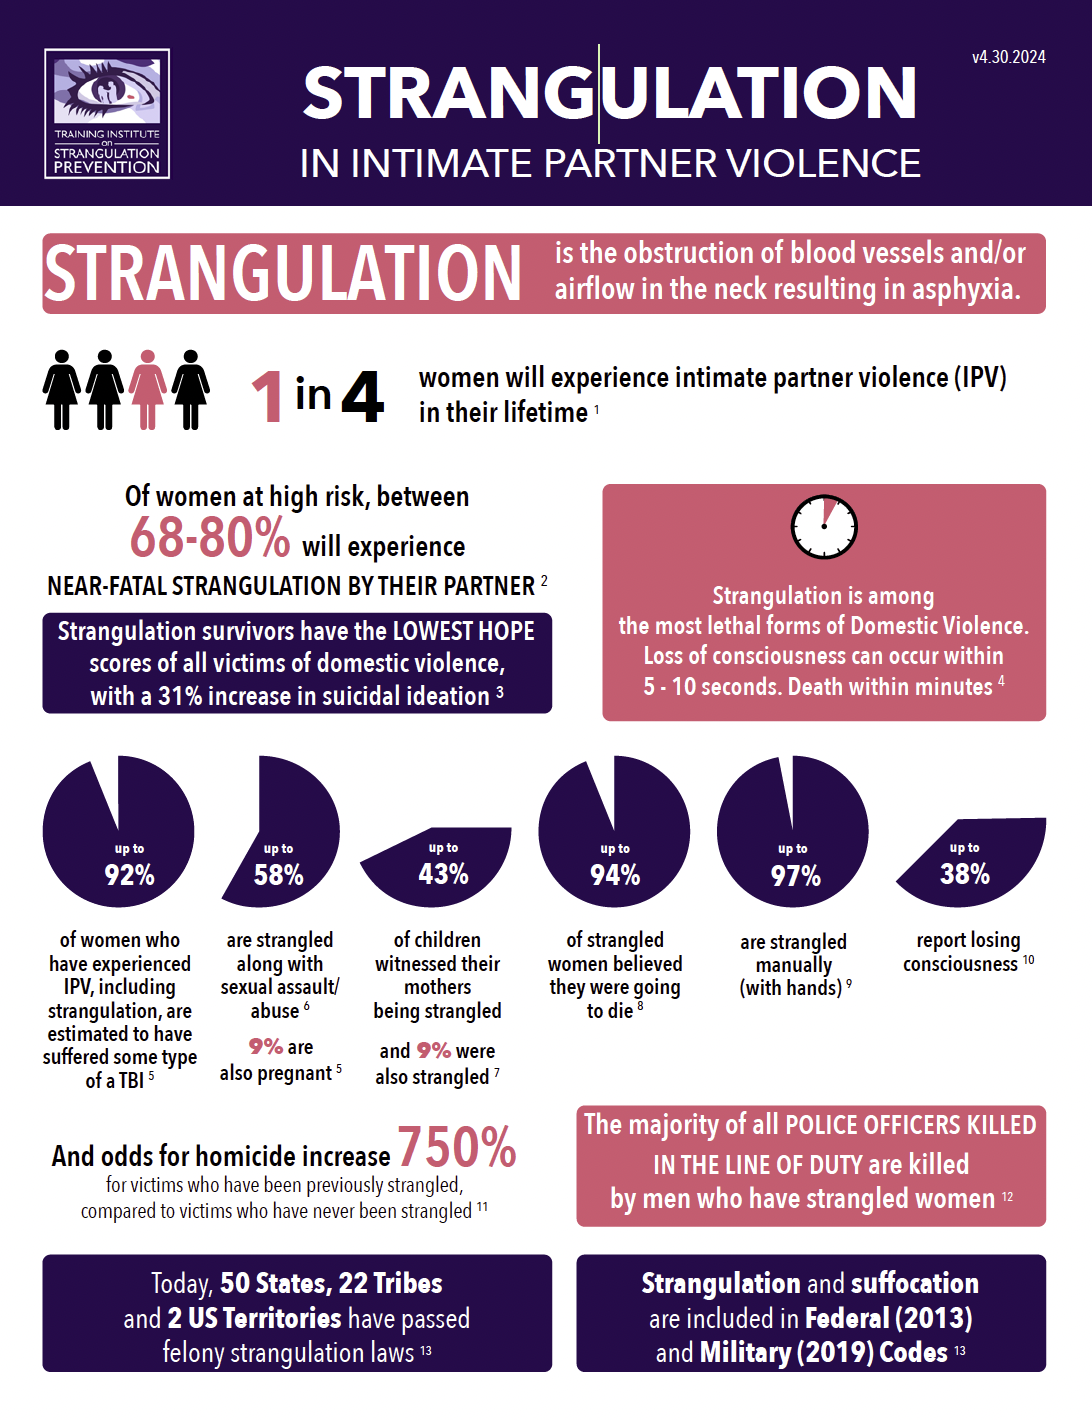 The document is about the prevalence, consequences, and risks associated with strangulation in cases of intimate partner violence.